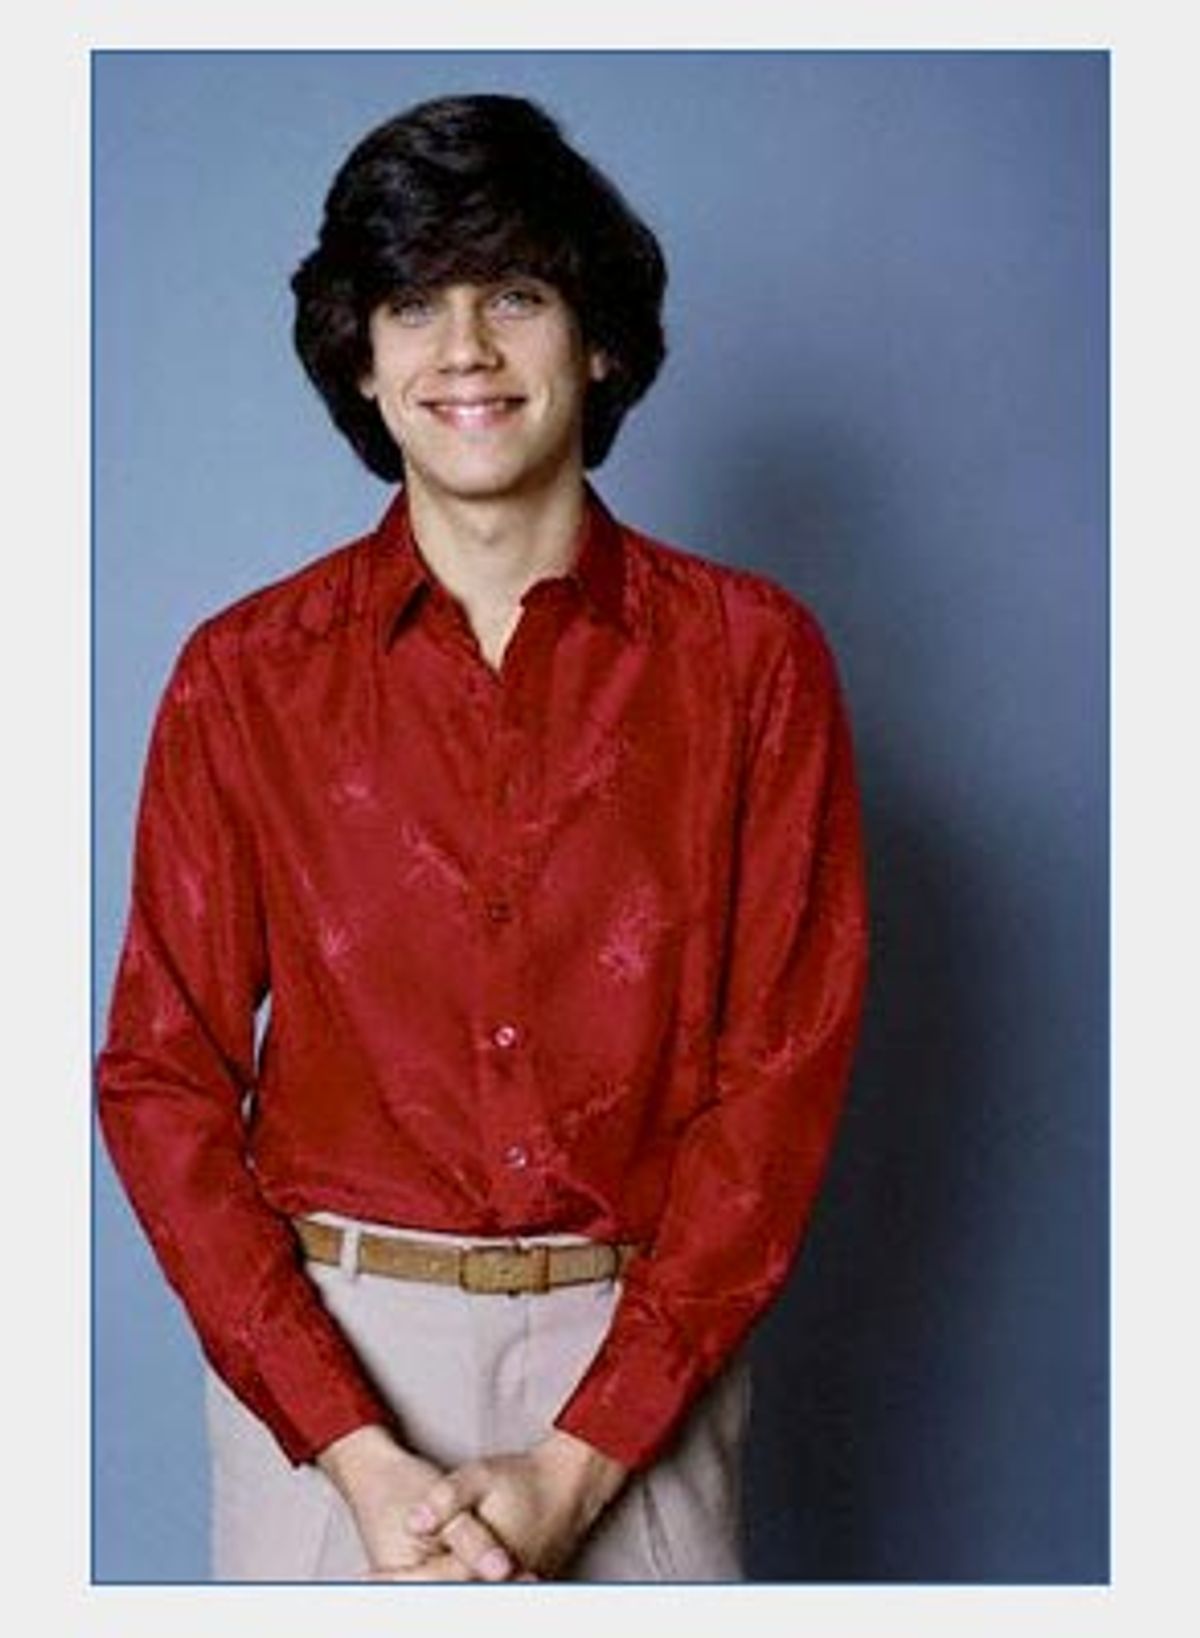 Robby Benson's clean white underpants